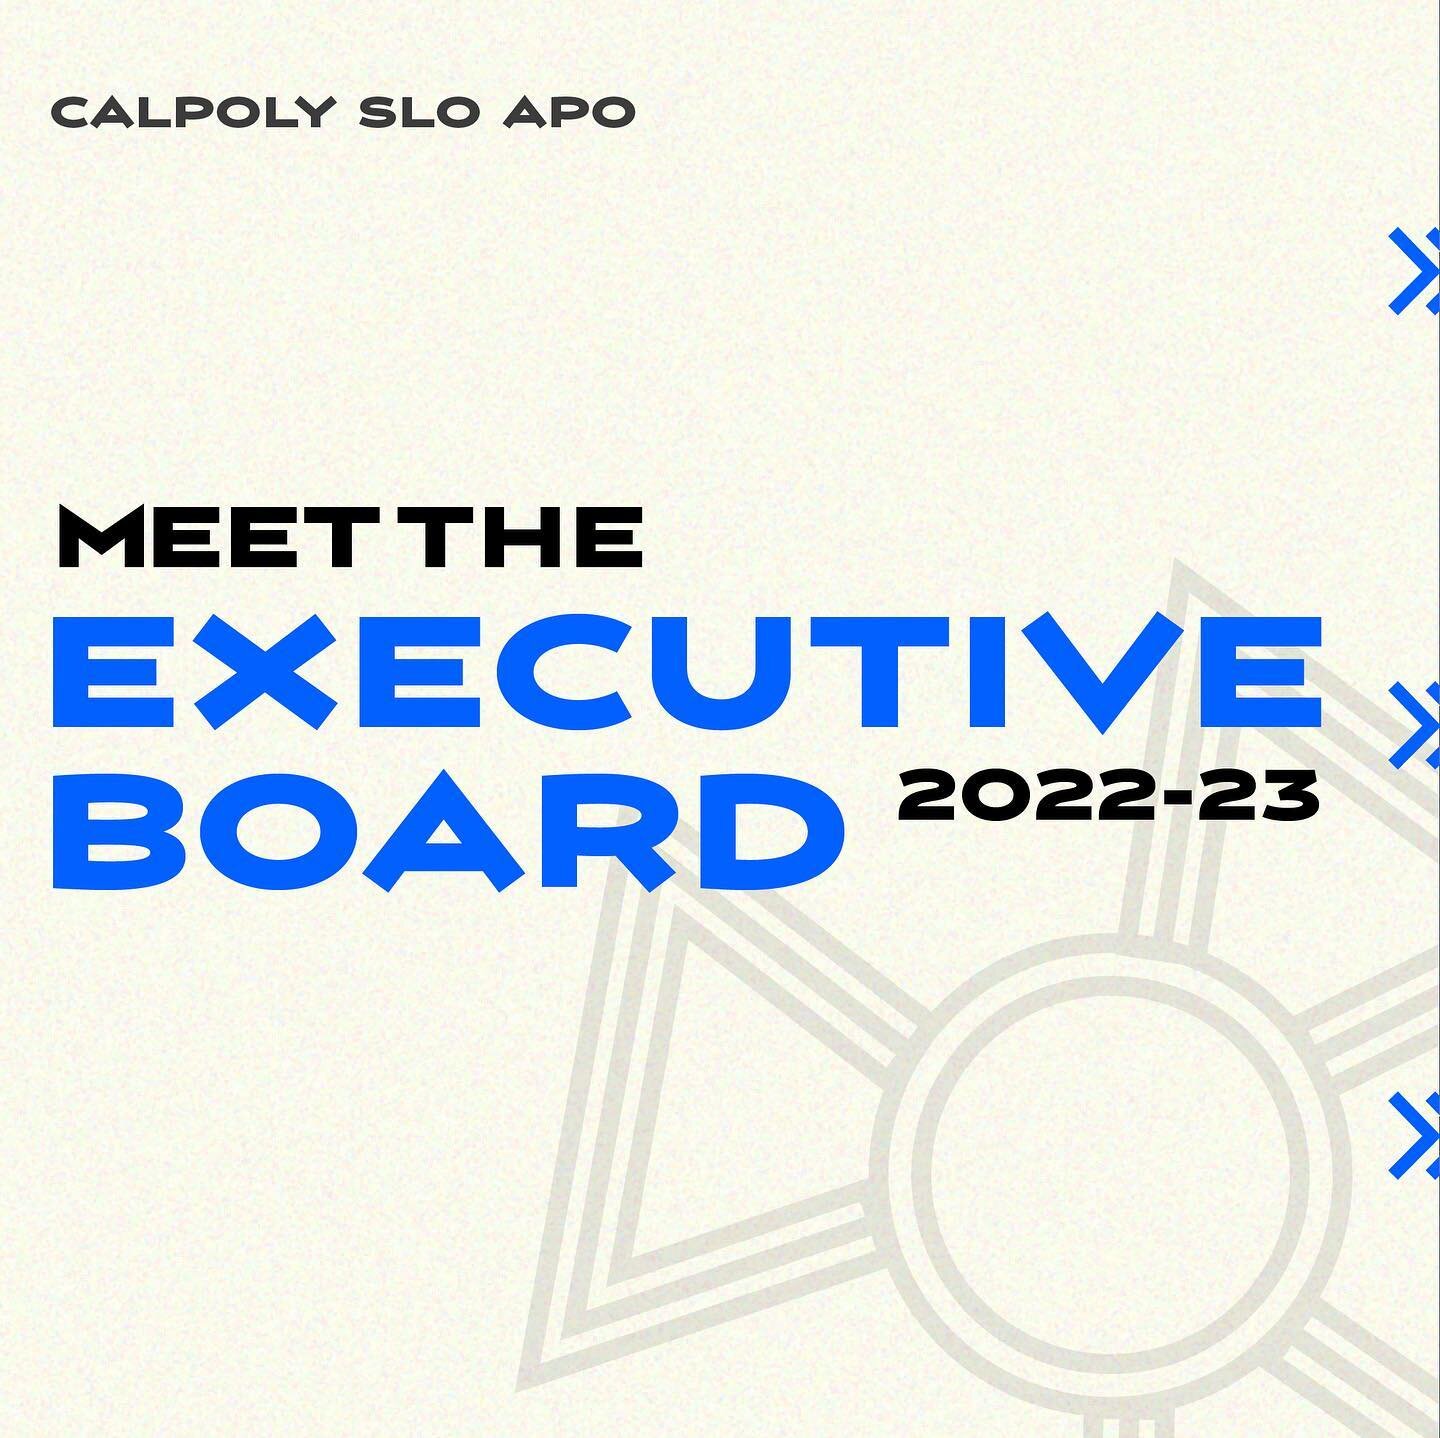 ✨Meet the Executive Board!✨

Take the time to be familiar with the members that are proud to serve their community in SLO and family in APO!

#apo #alphaphiomega #calpolyslo #calpoly